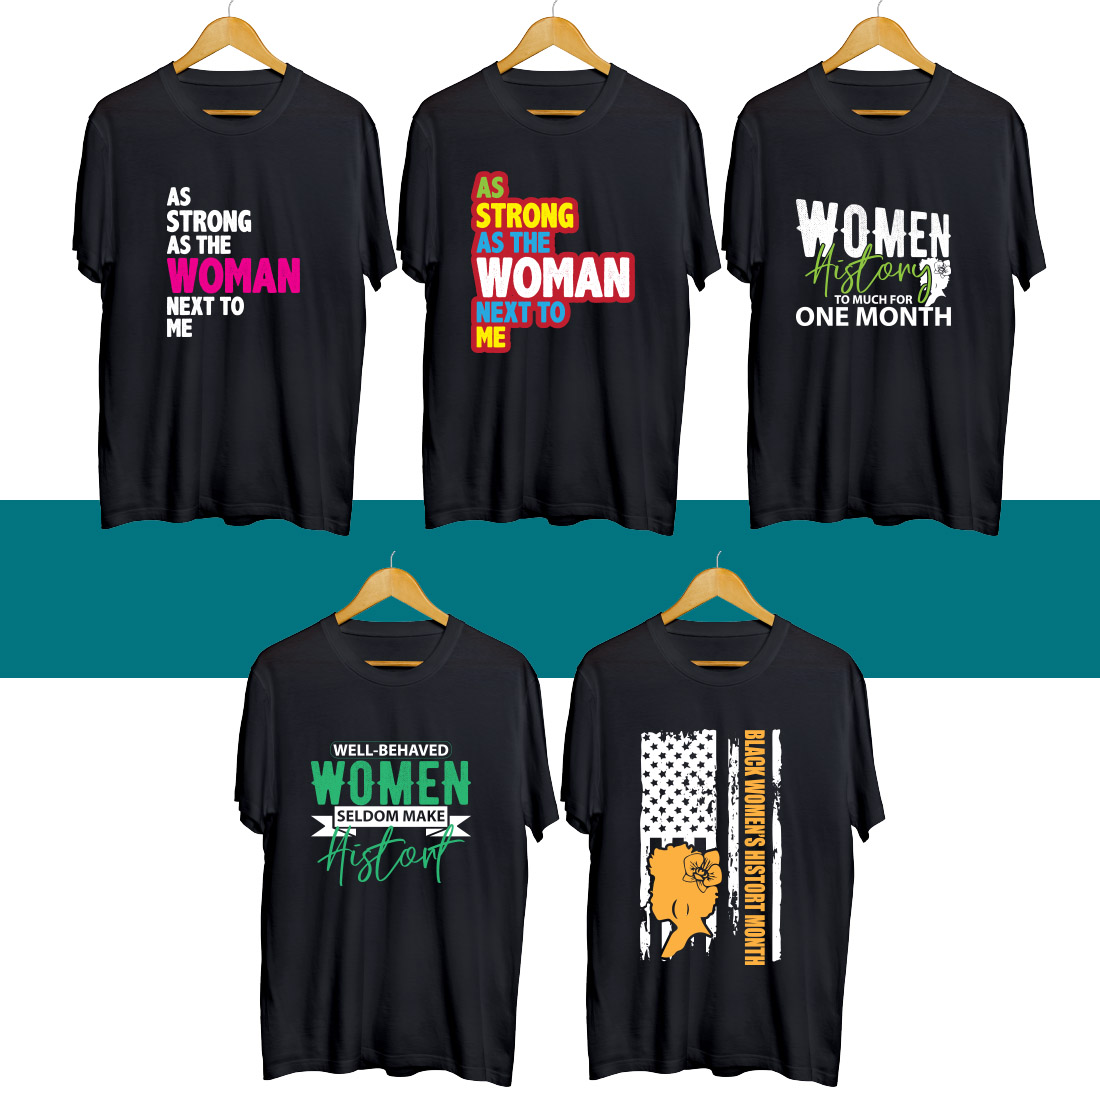 Group of t - shirts with different slogans on them.